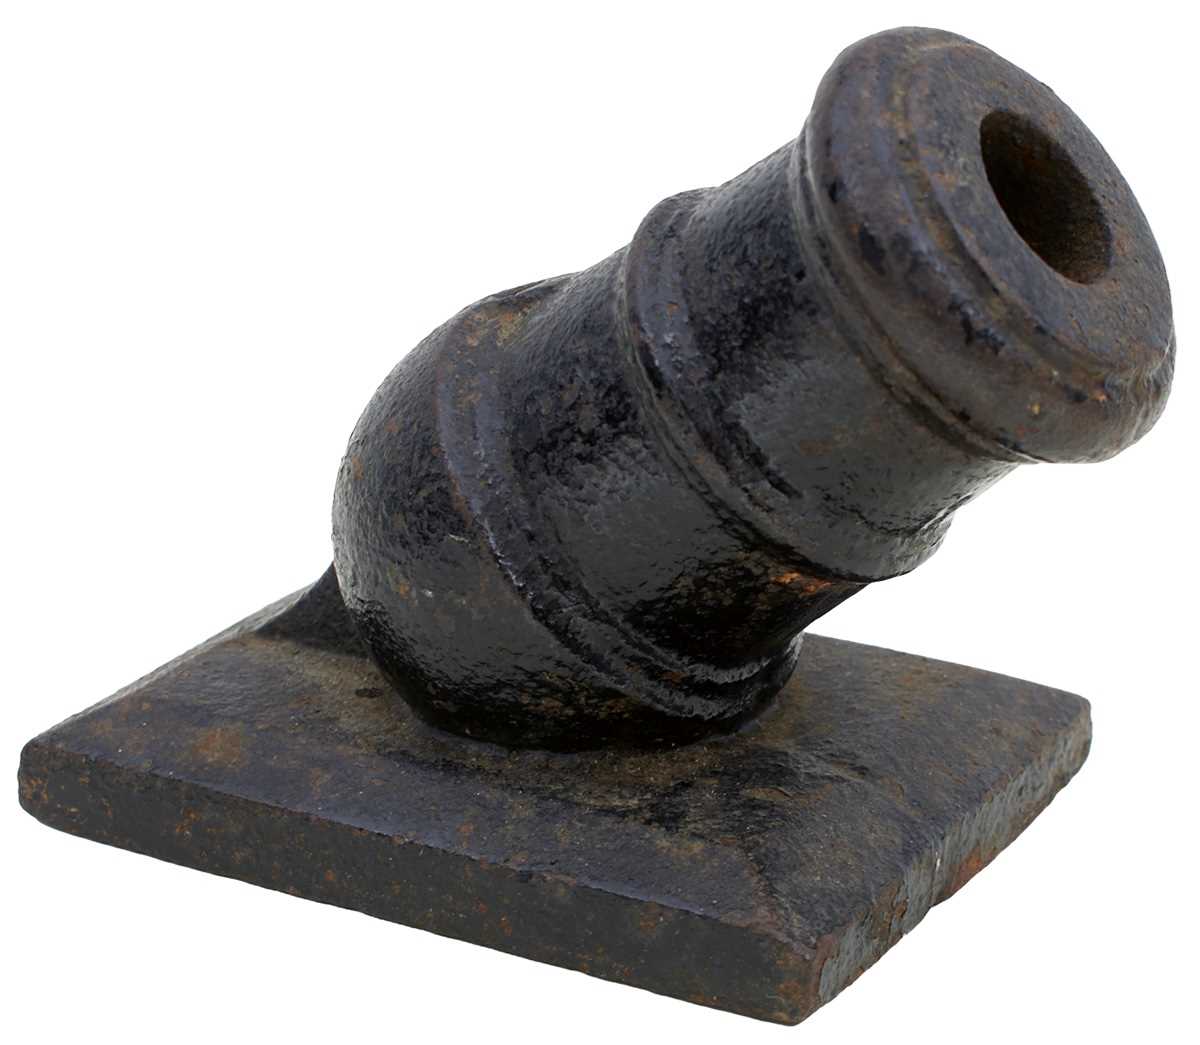 Lot A LATE 18TH OR EARLY 19TH CENTURY SMALL CAST IRON MORTAR